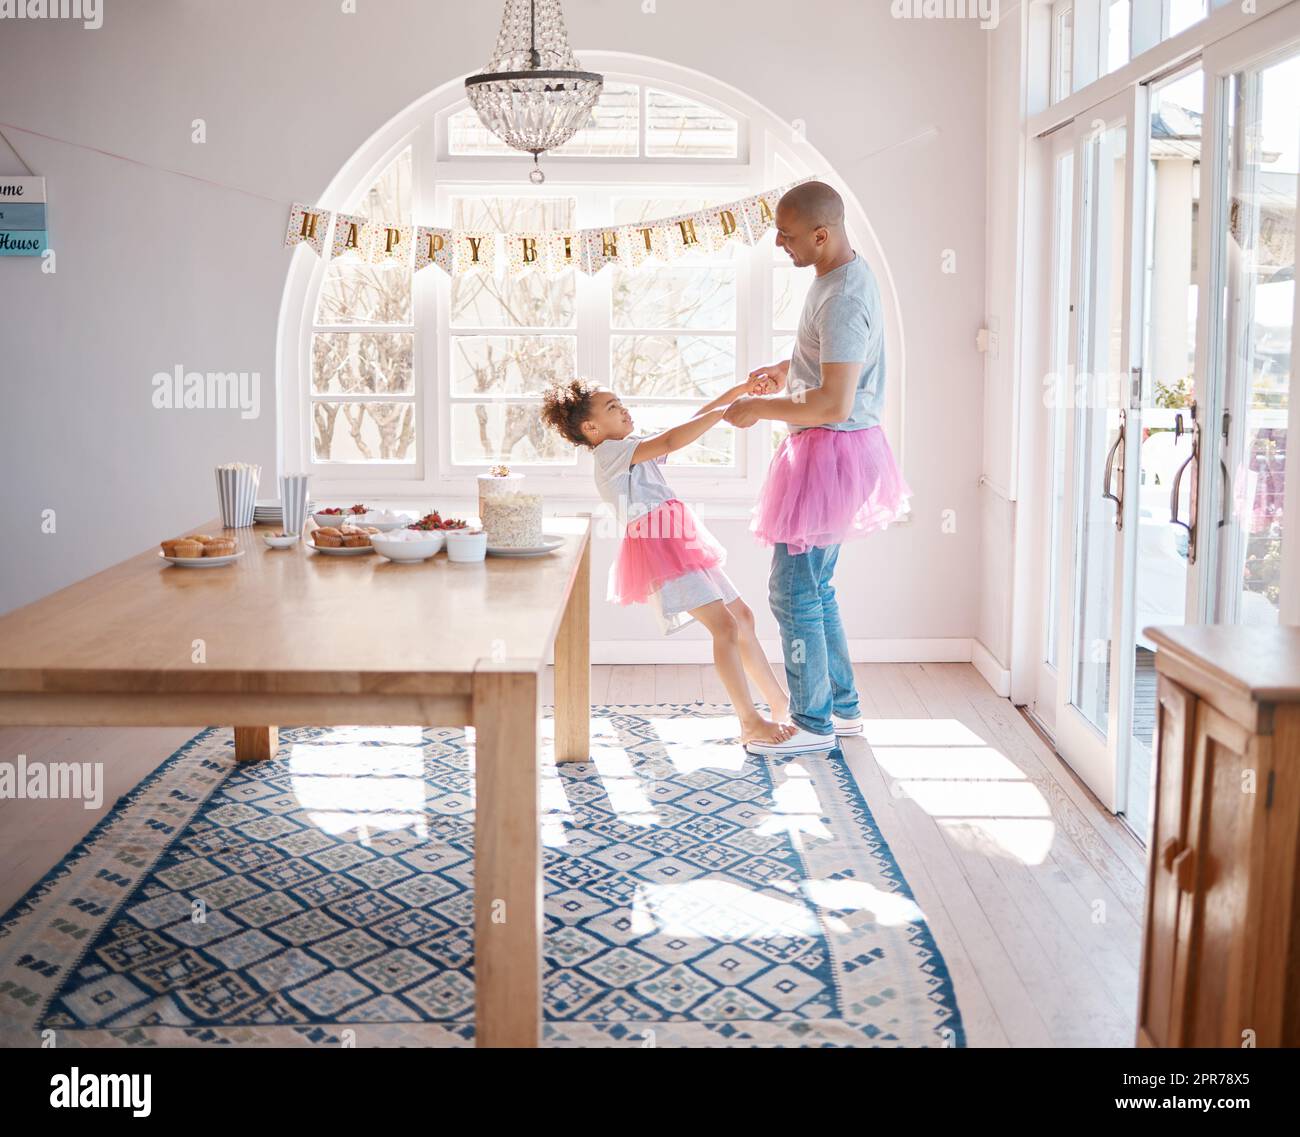 Celebrate and be your very happiest. Shot of an adorable little girl wearing a tutu and dancing with her father in the living room. Stock Photo